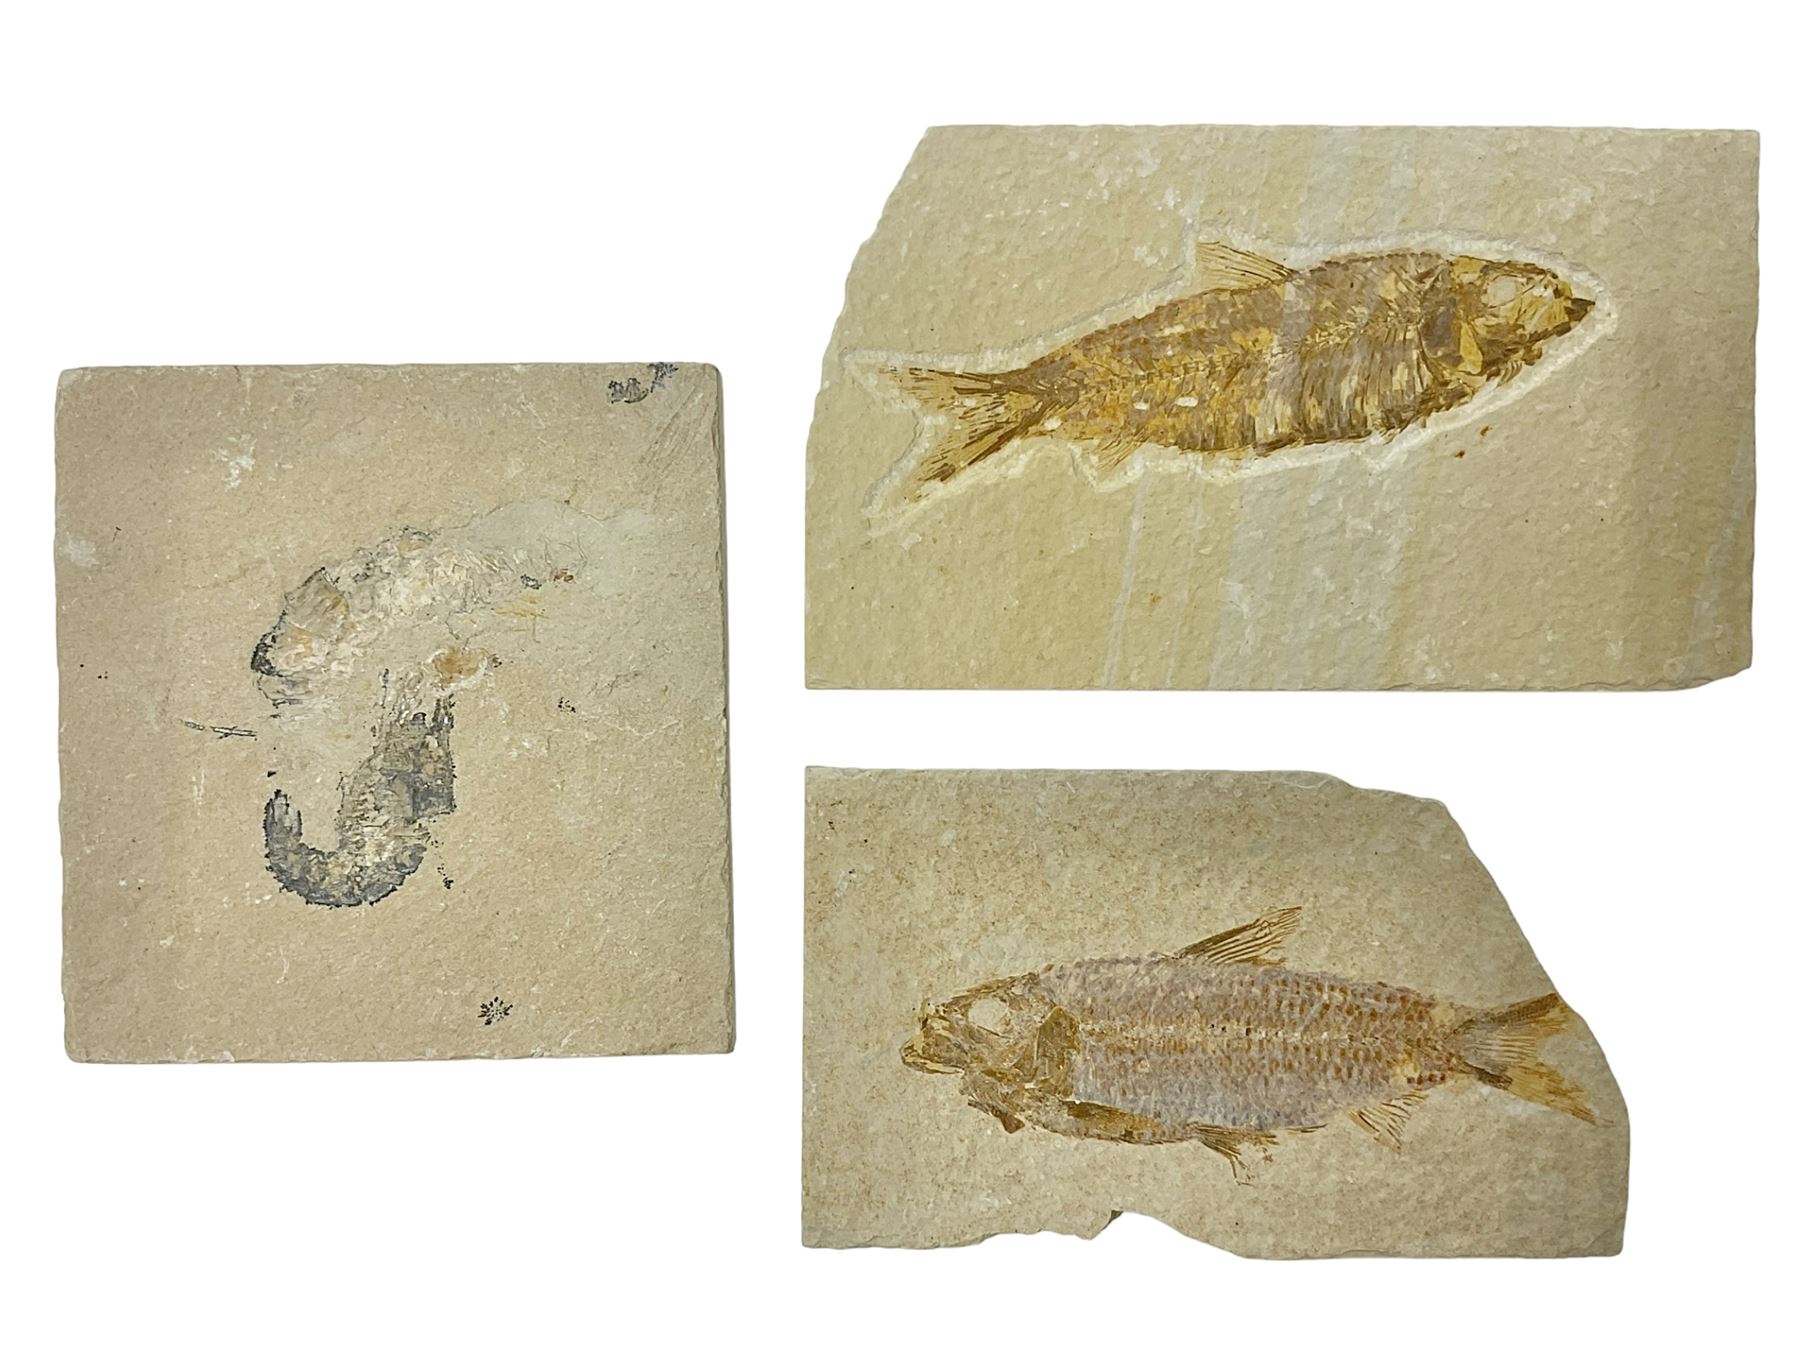 Two fossilised fish (Knightia alta) each in an individual matrix